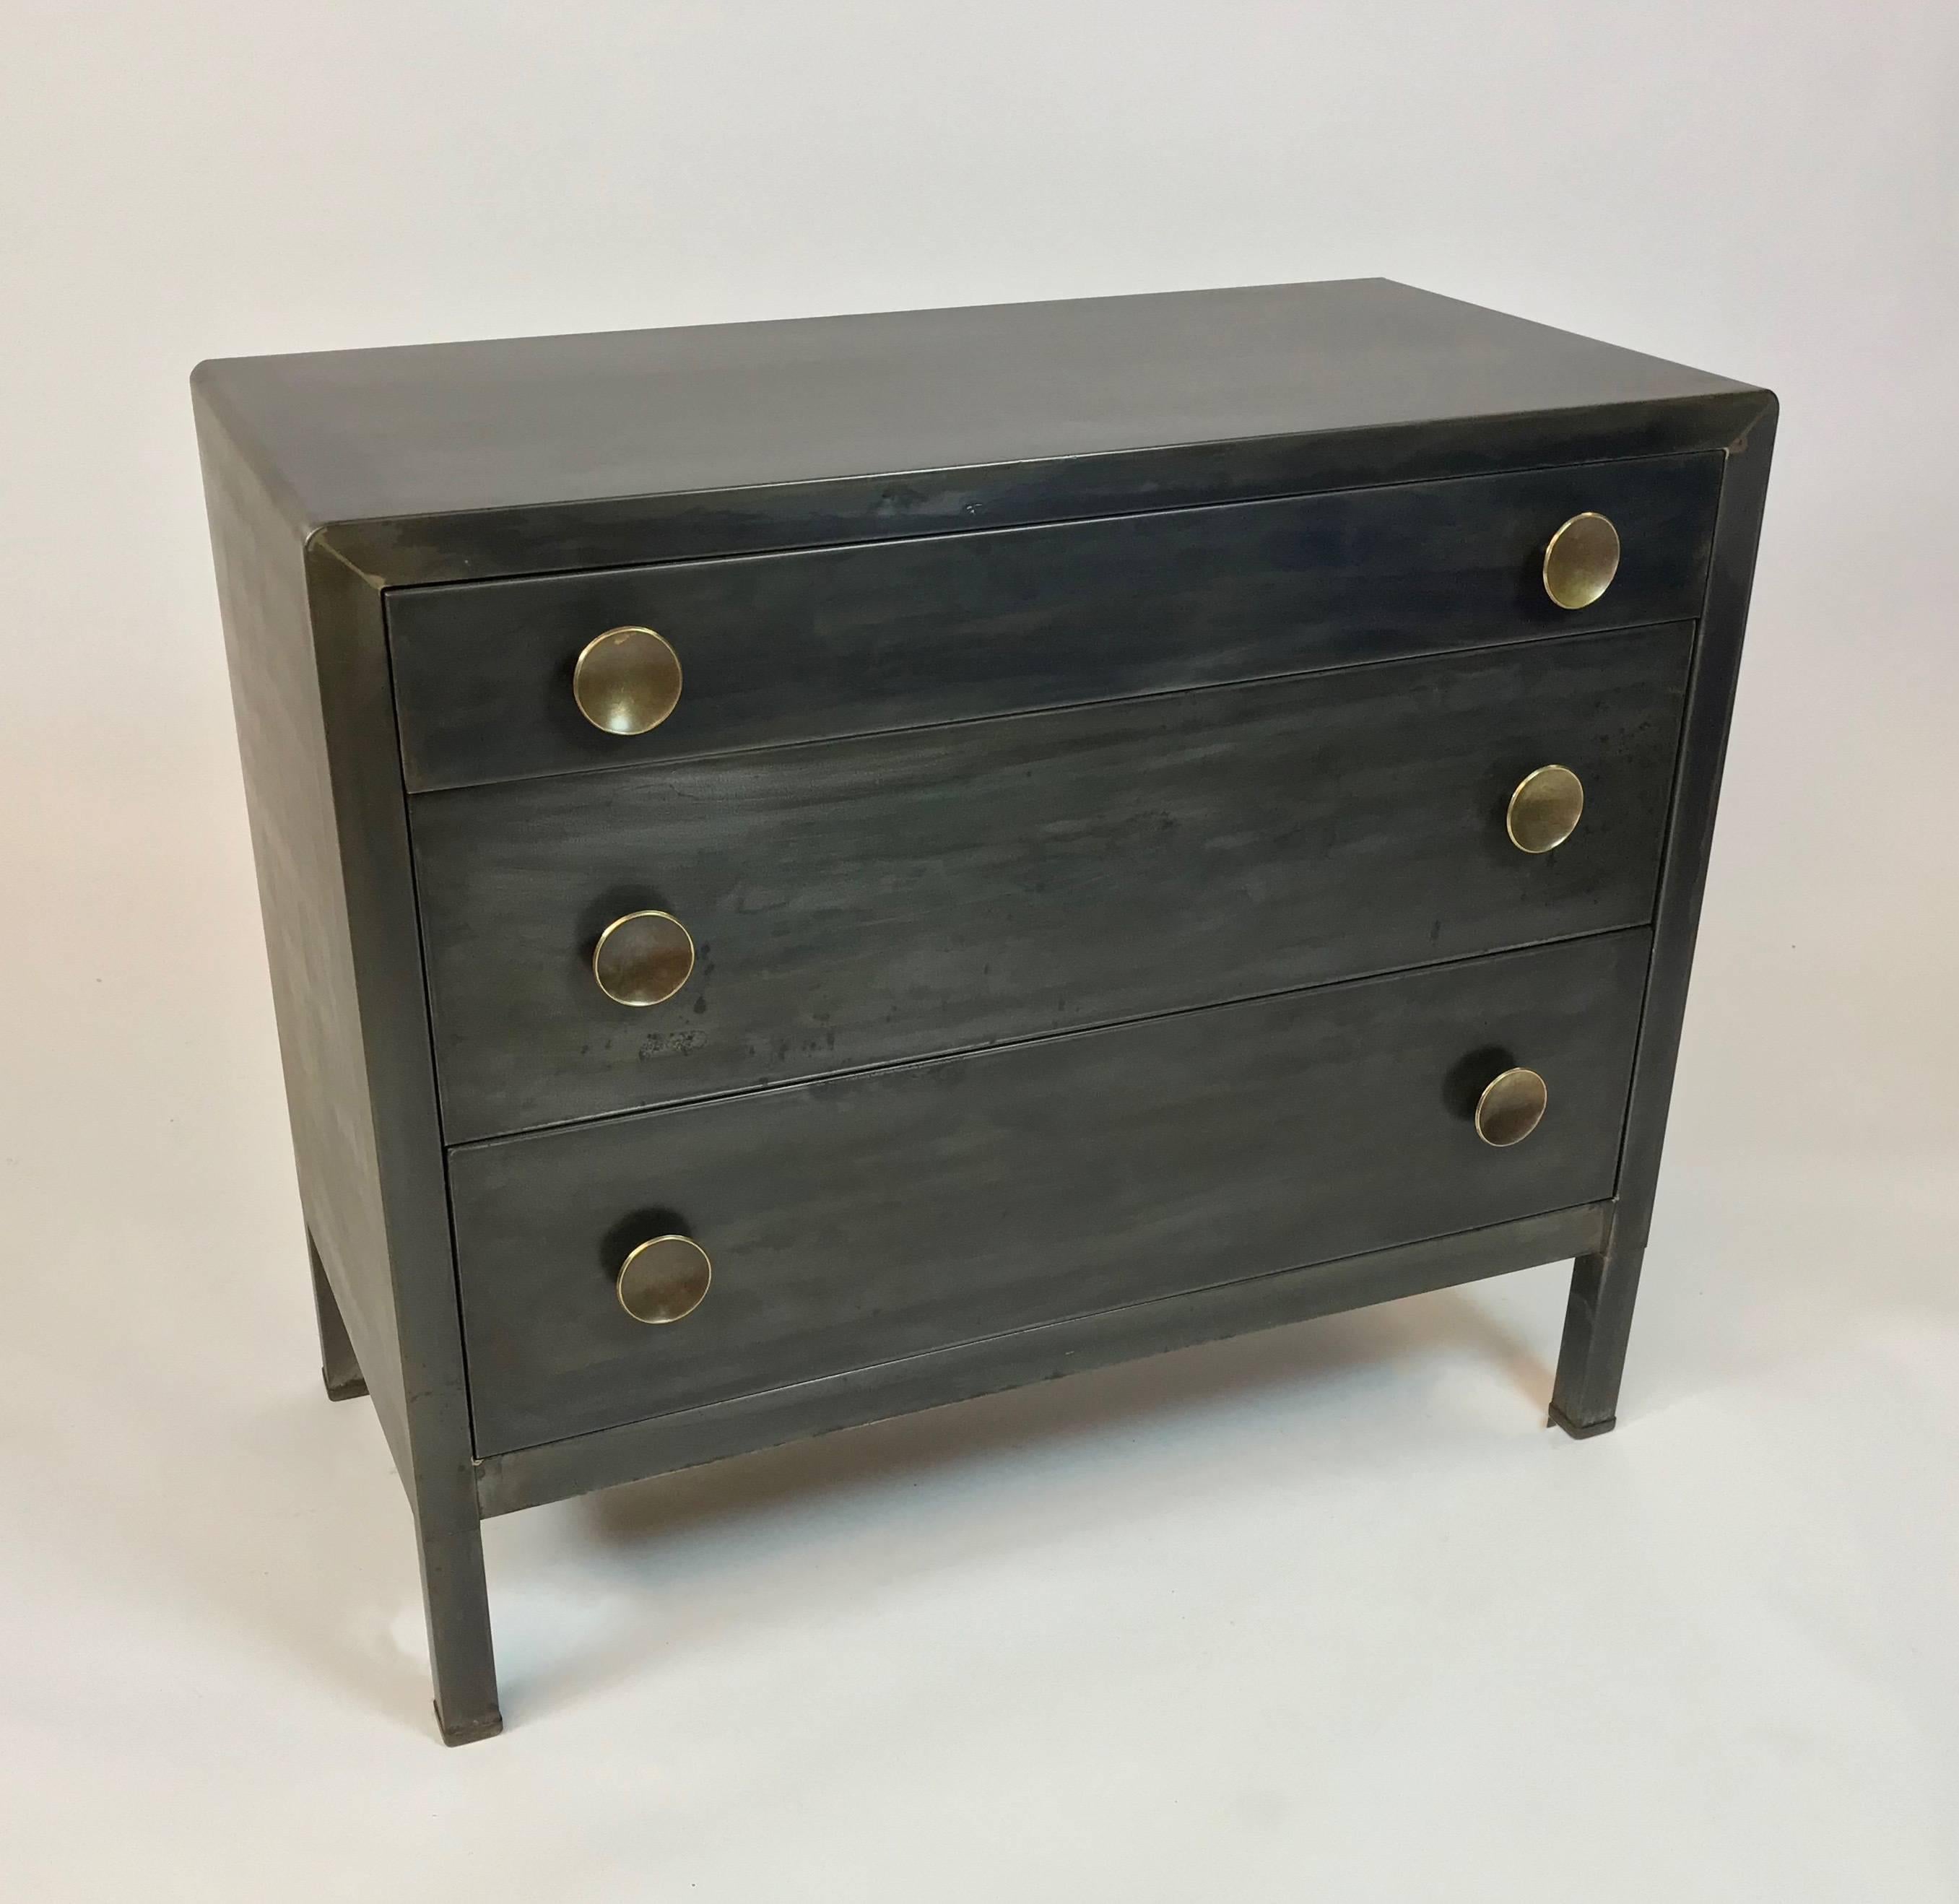 Machine-age, brushed steel, three-drawer dresser designed by Norman Bel Geddes for Simmons Company Furniture features a custom gunmetal finish with contrasting round brass knobs. The bottom drawers are 9 inches height and the top drawer is 4.5